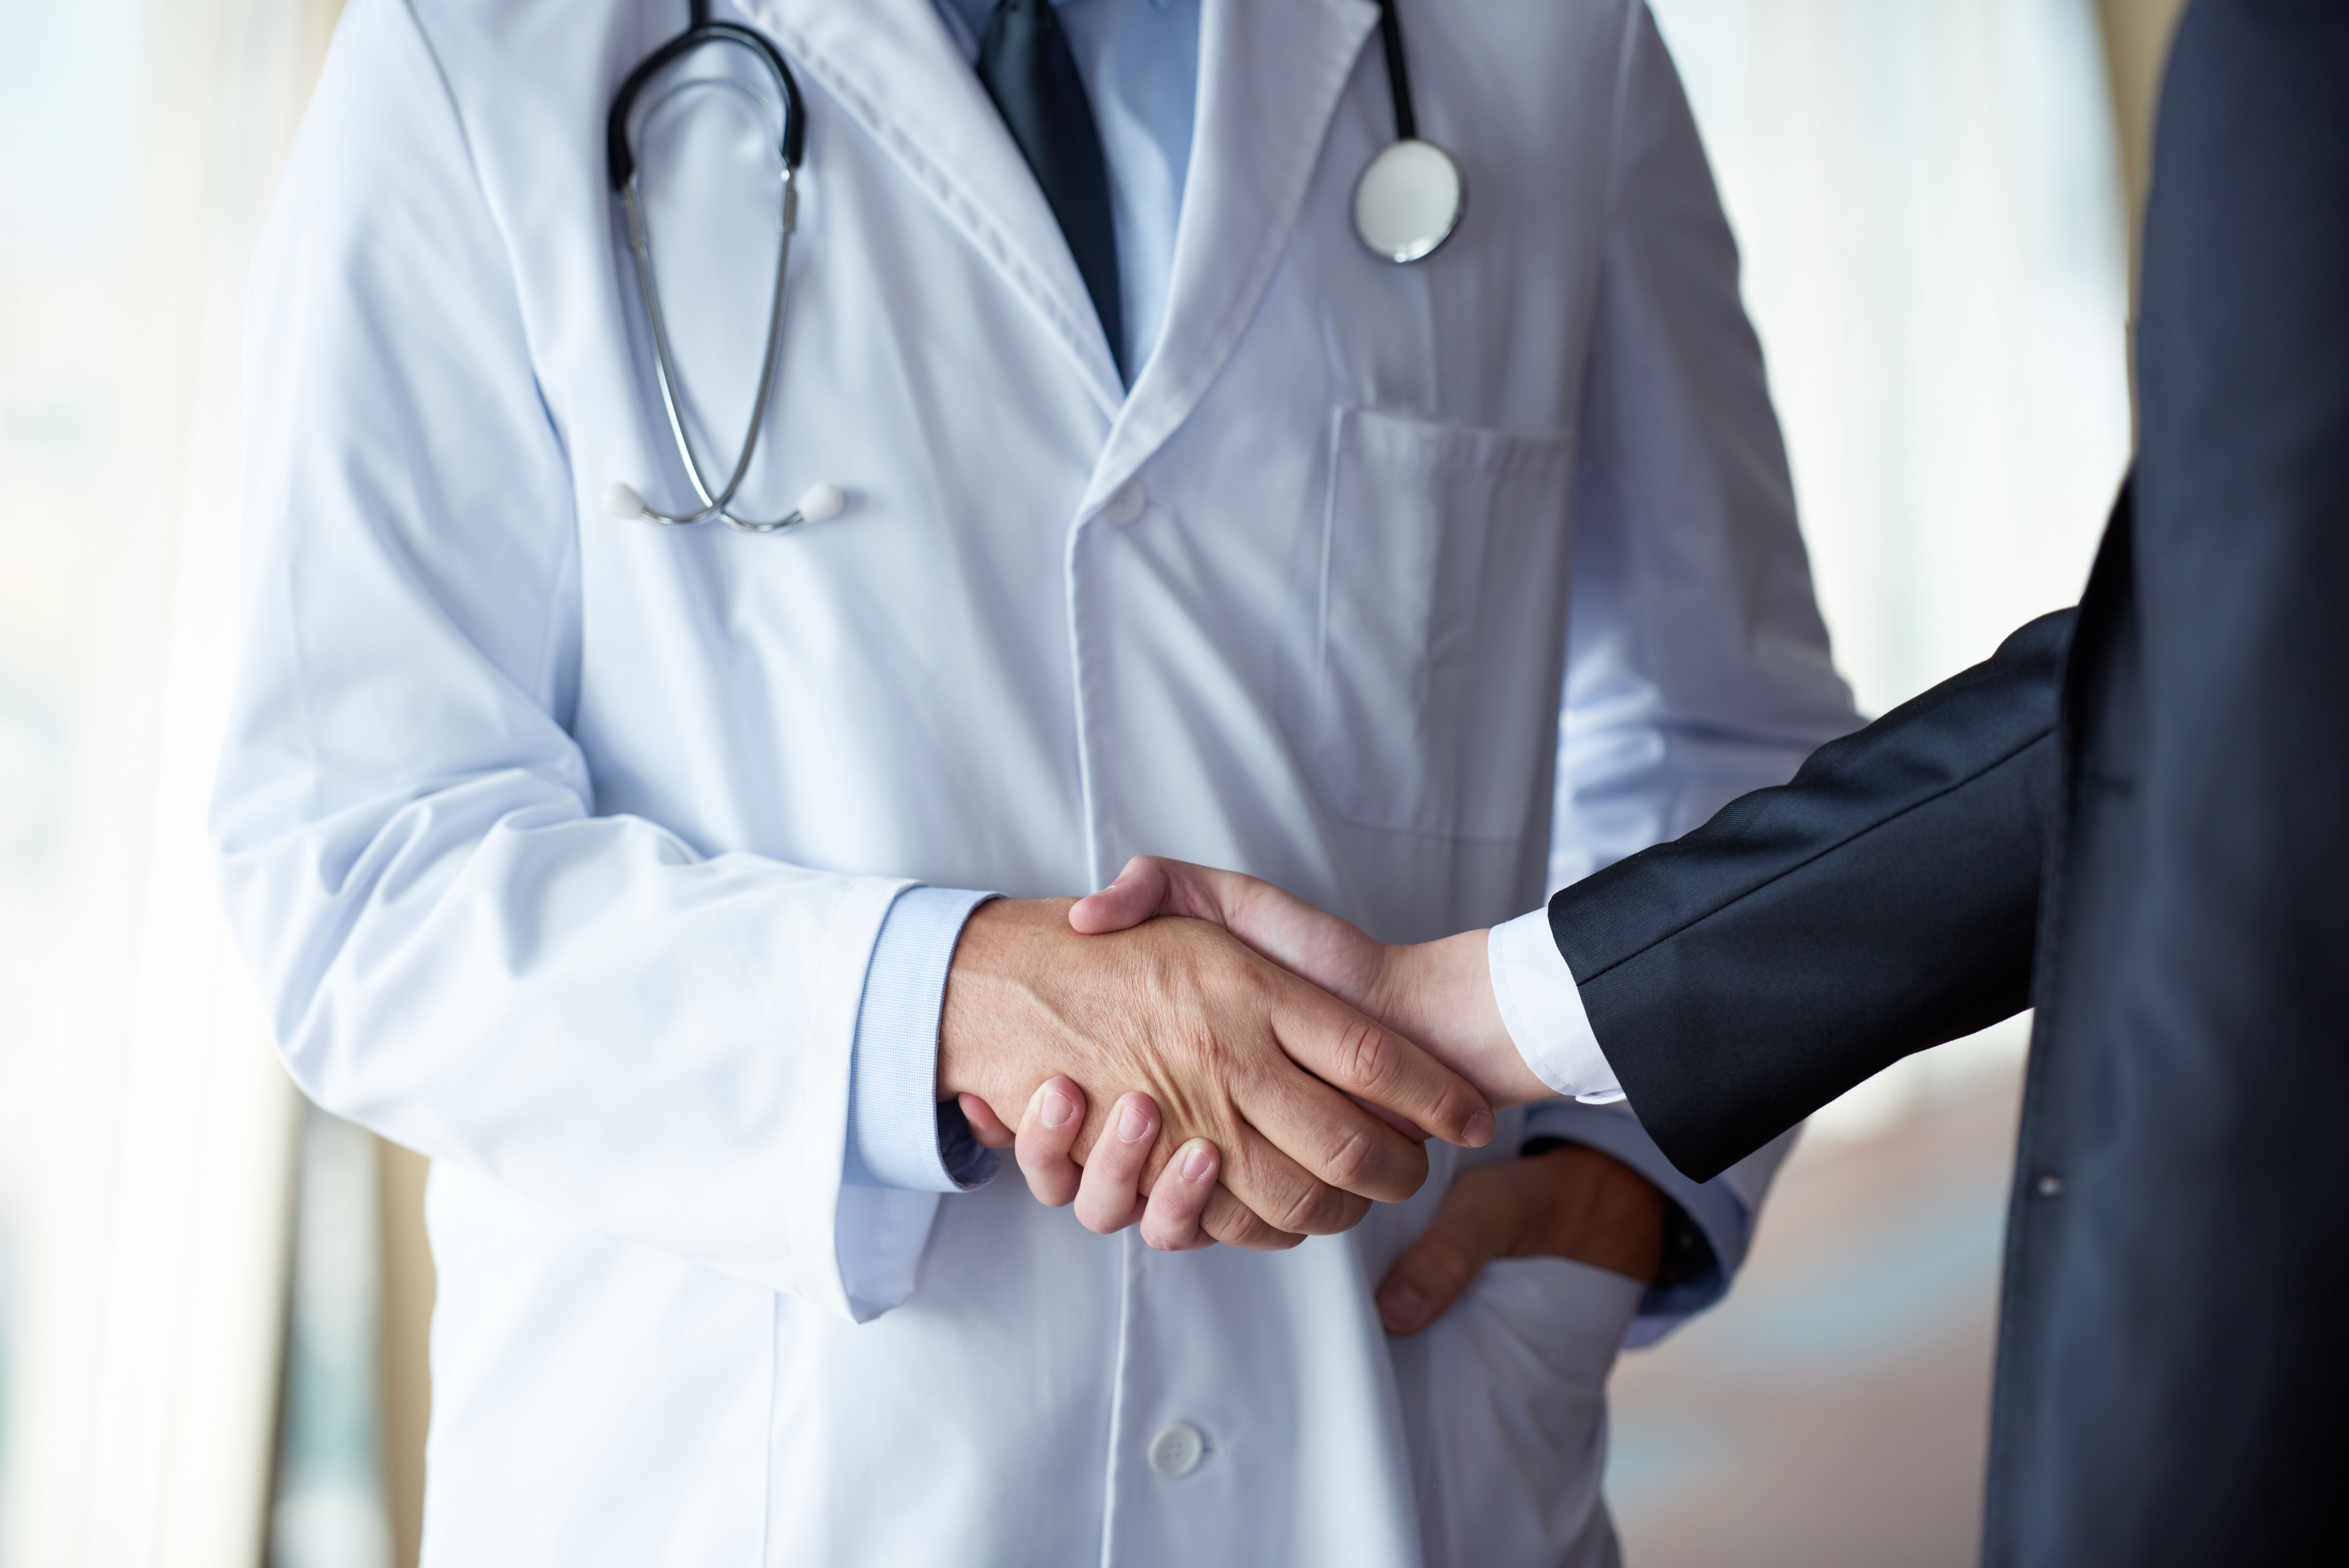 doctor handshake with a patient at doctors bright modern office in hospital